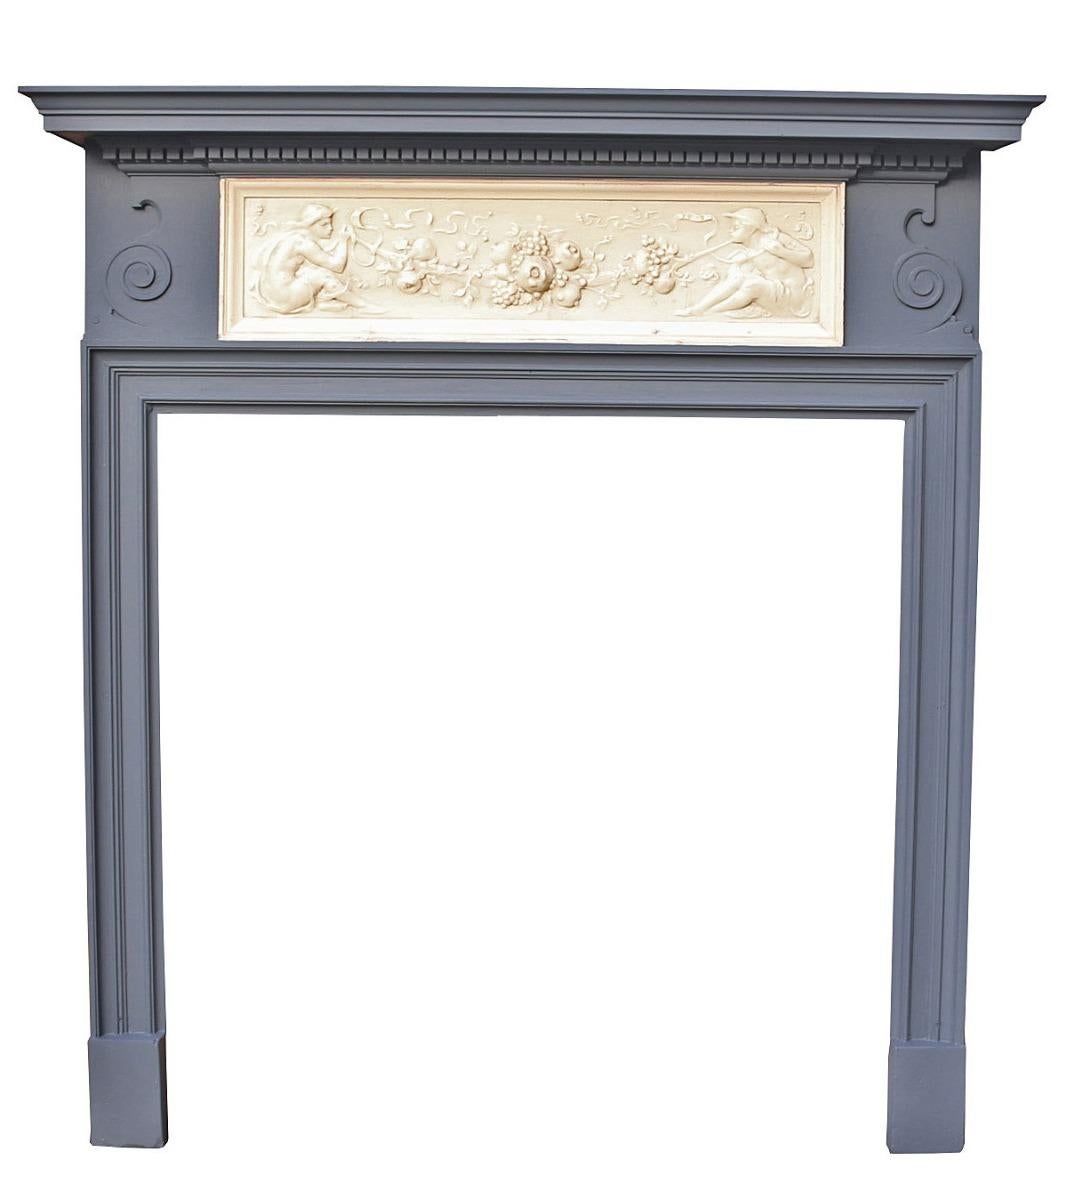 A striking surround, painted in grey, with cream centre tablet.

Measures: Opening height 102 cm

Opening width 101 cm

Width between outside of legs 122 cm.